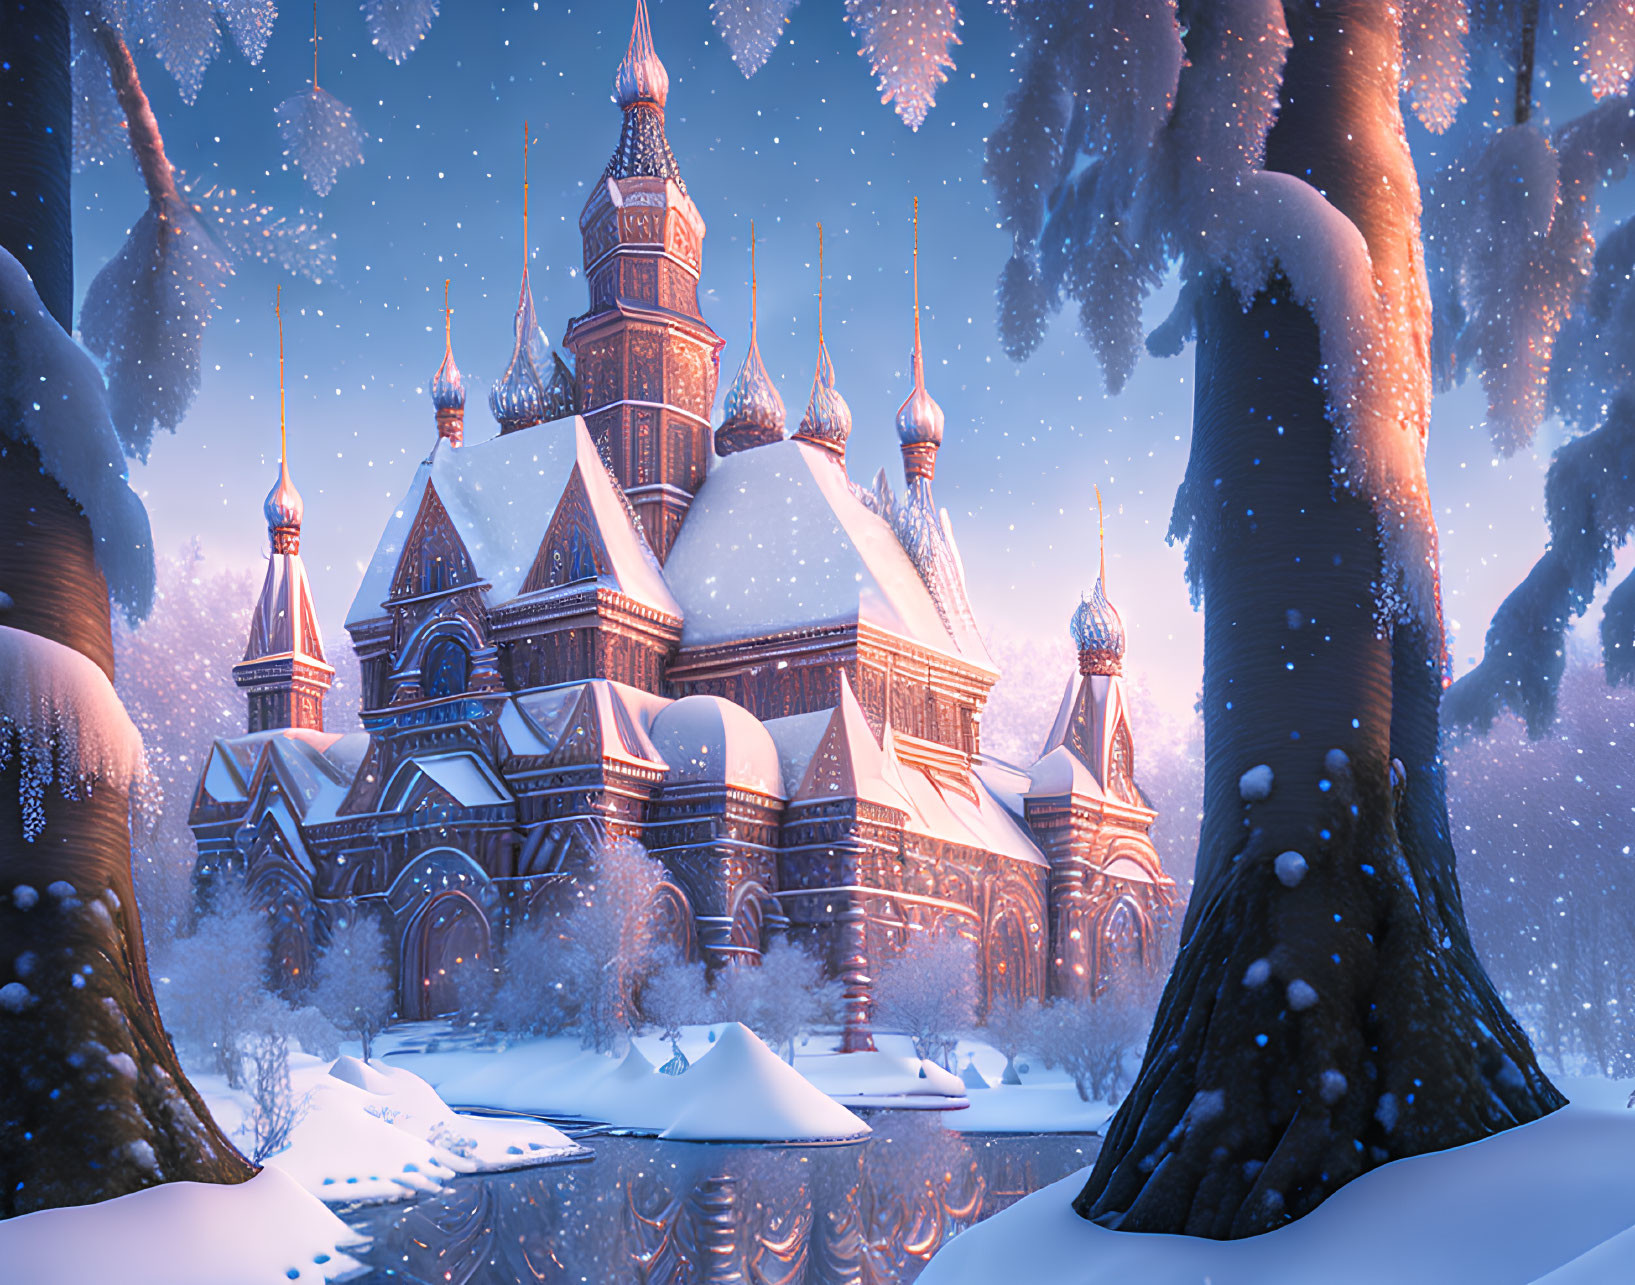 Snow-covered castle with ornate spires in enchanting winter scene